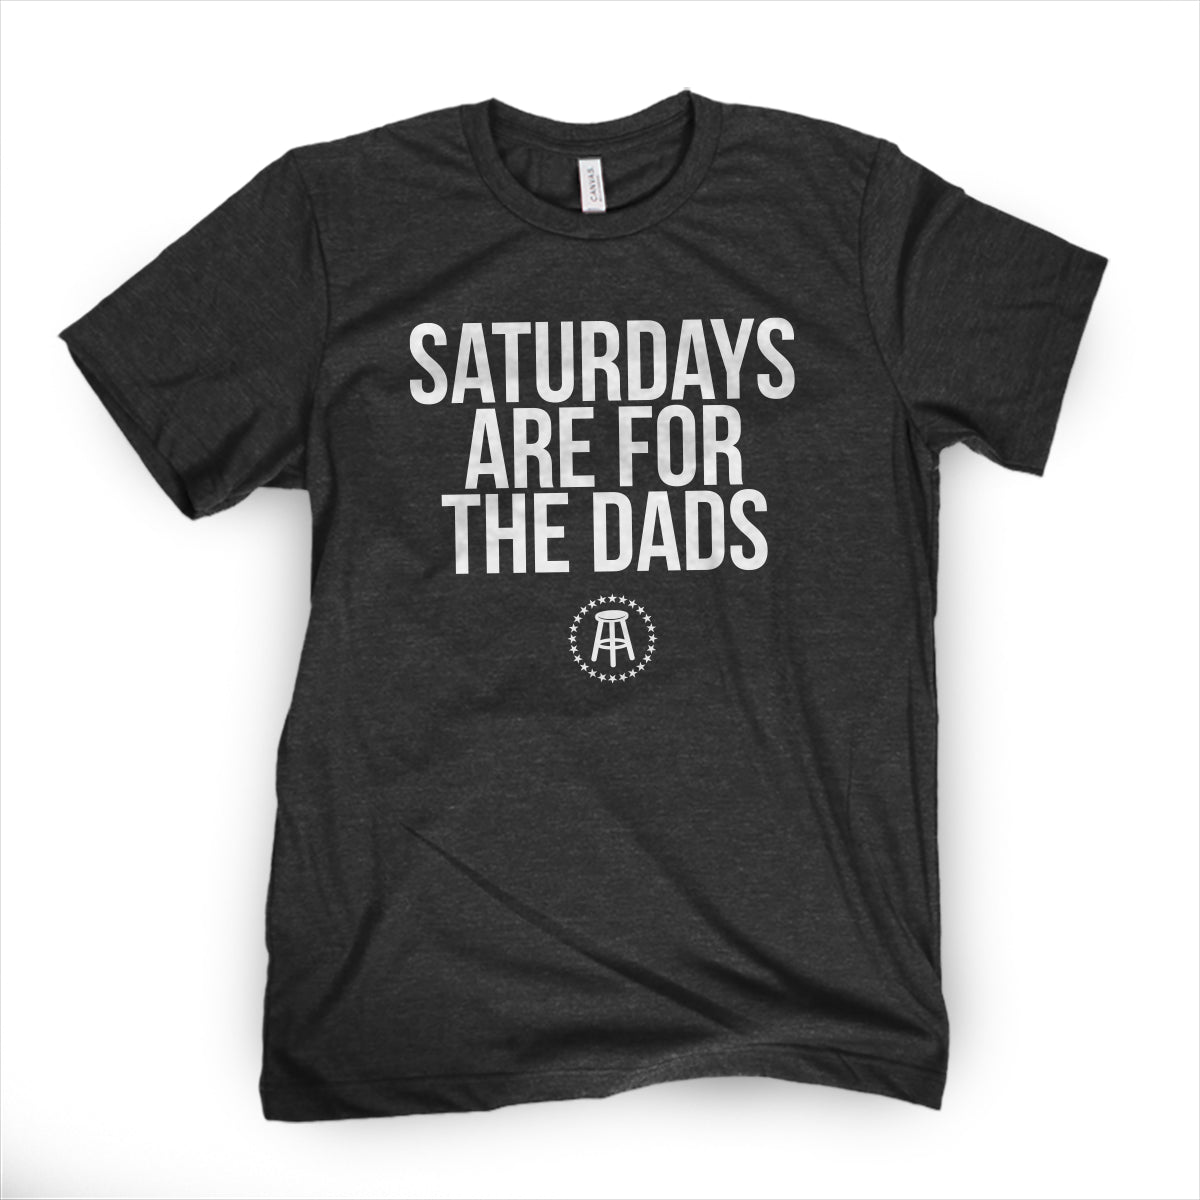 Saturdays Are For The Dads II Tee